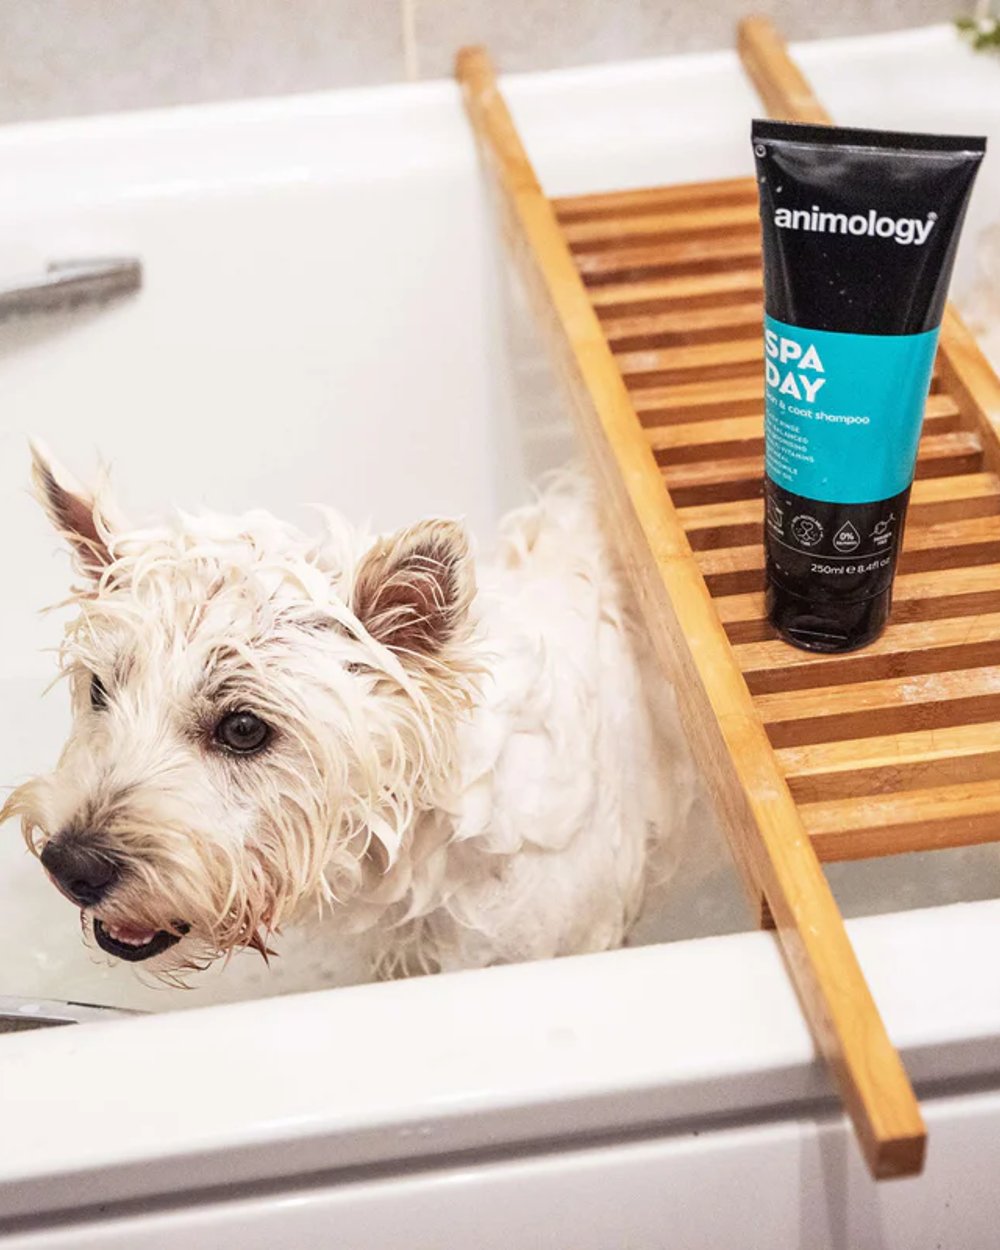 Animology Spa Day Shampoo 250ml with dog in background